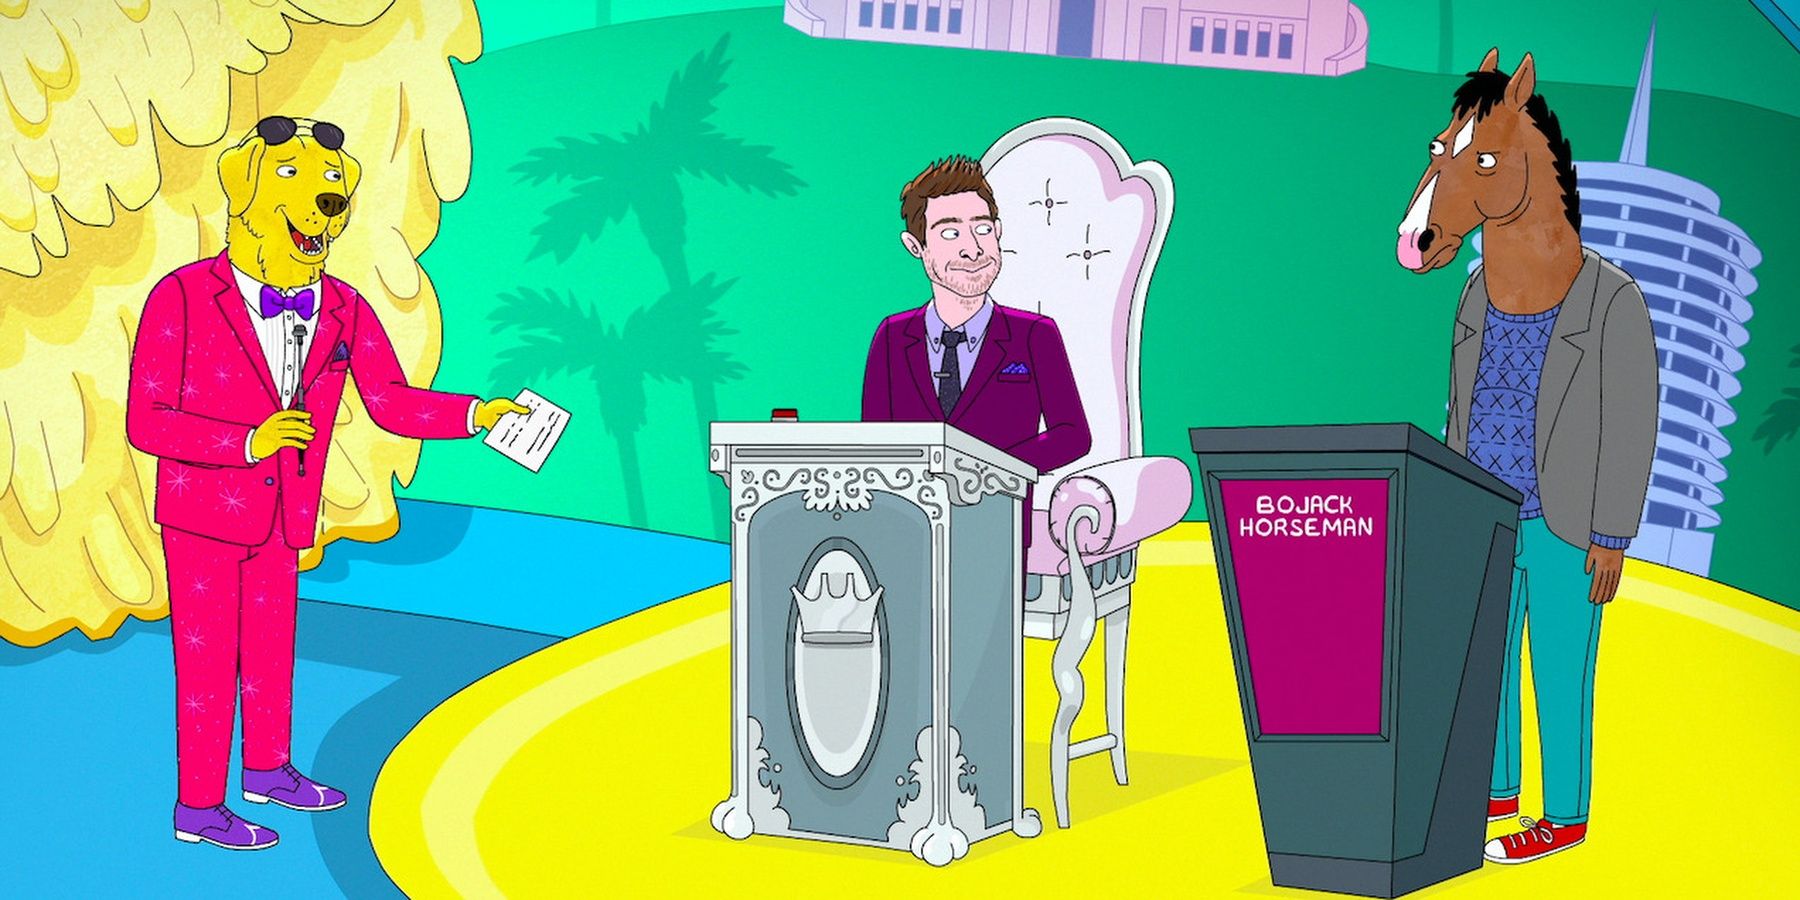 Mr peanutbutter in a pink suit hosting a game show standing opposite daniel radcliffe and bojack horseman